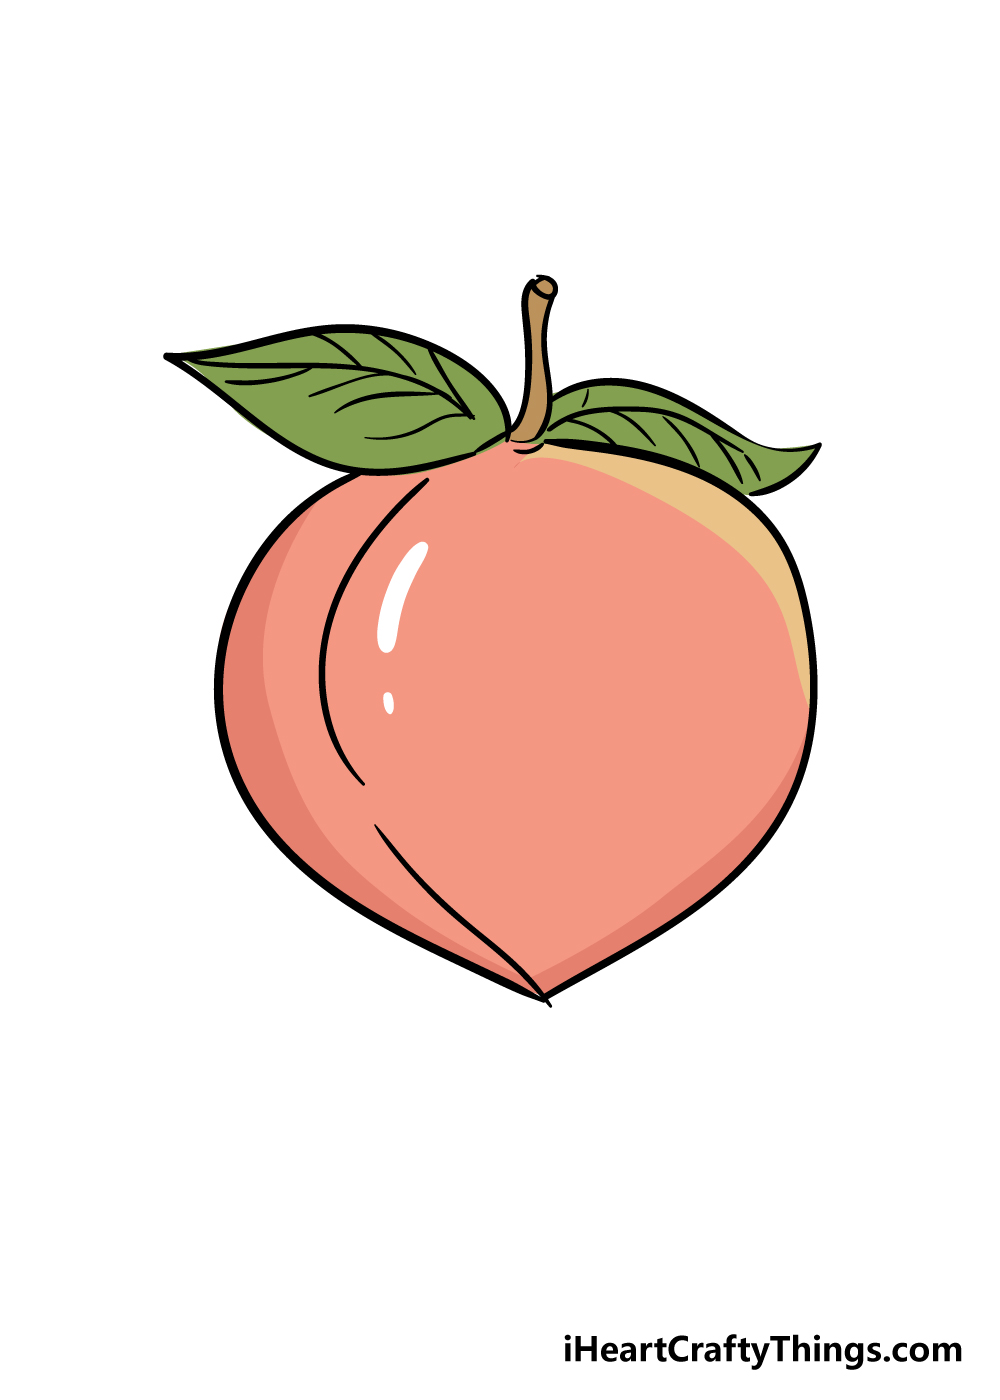 Peach Drawing How To Draw A Peach Step By Step